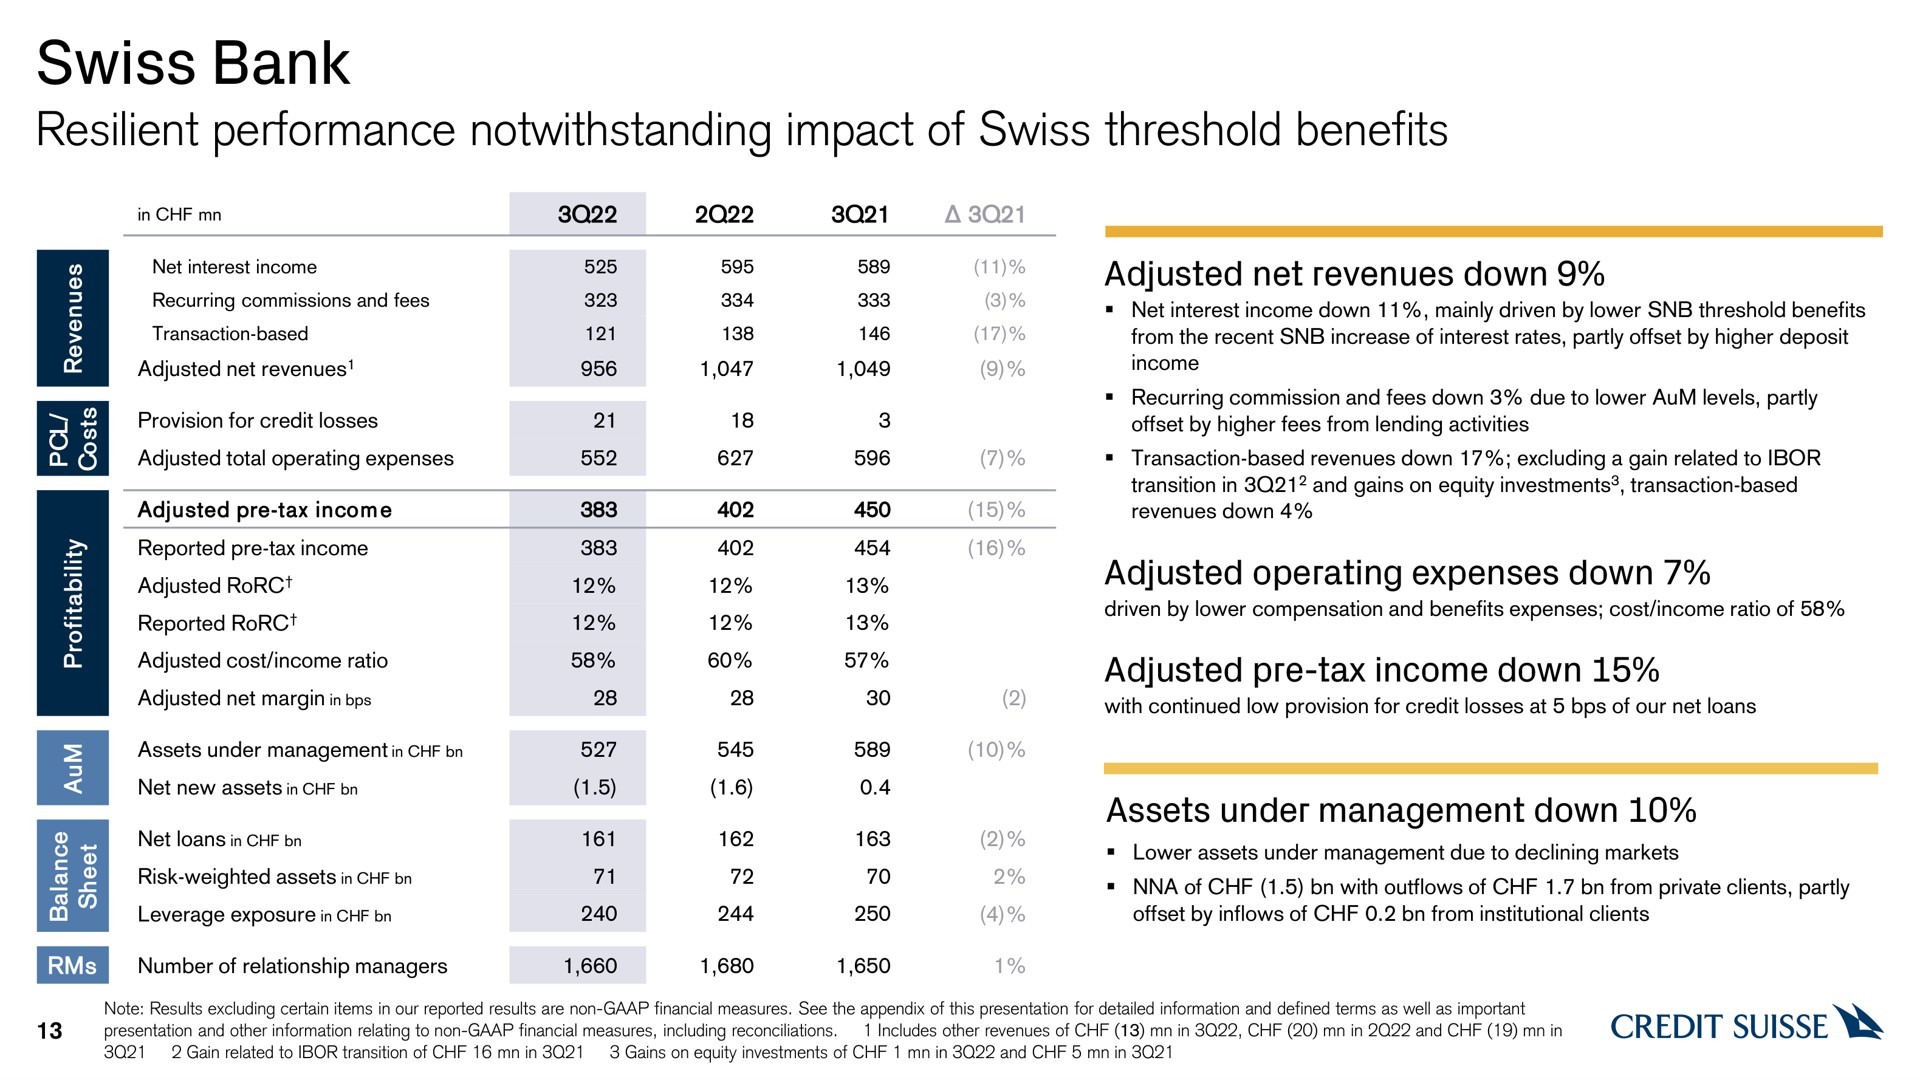 swiss bank resilient performance notwithstanding impact of swiss threshold benefits | Credit Suisse